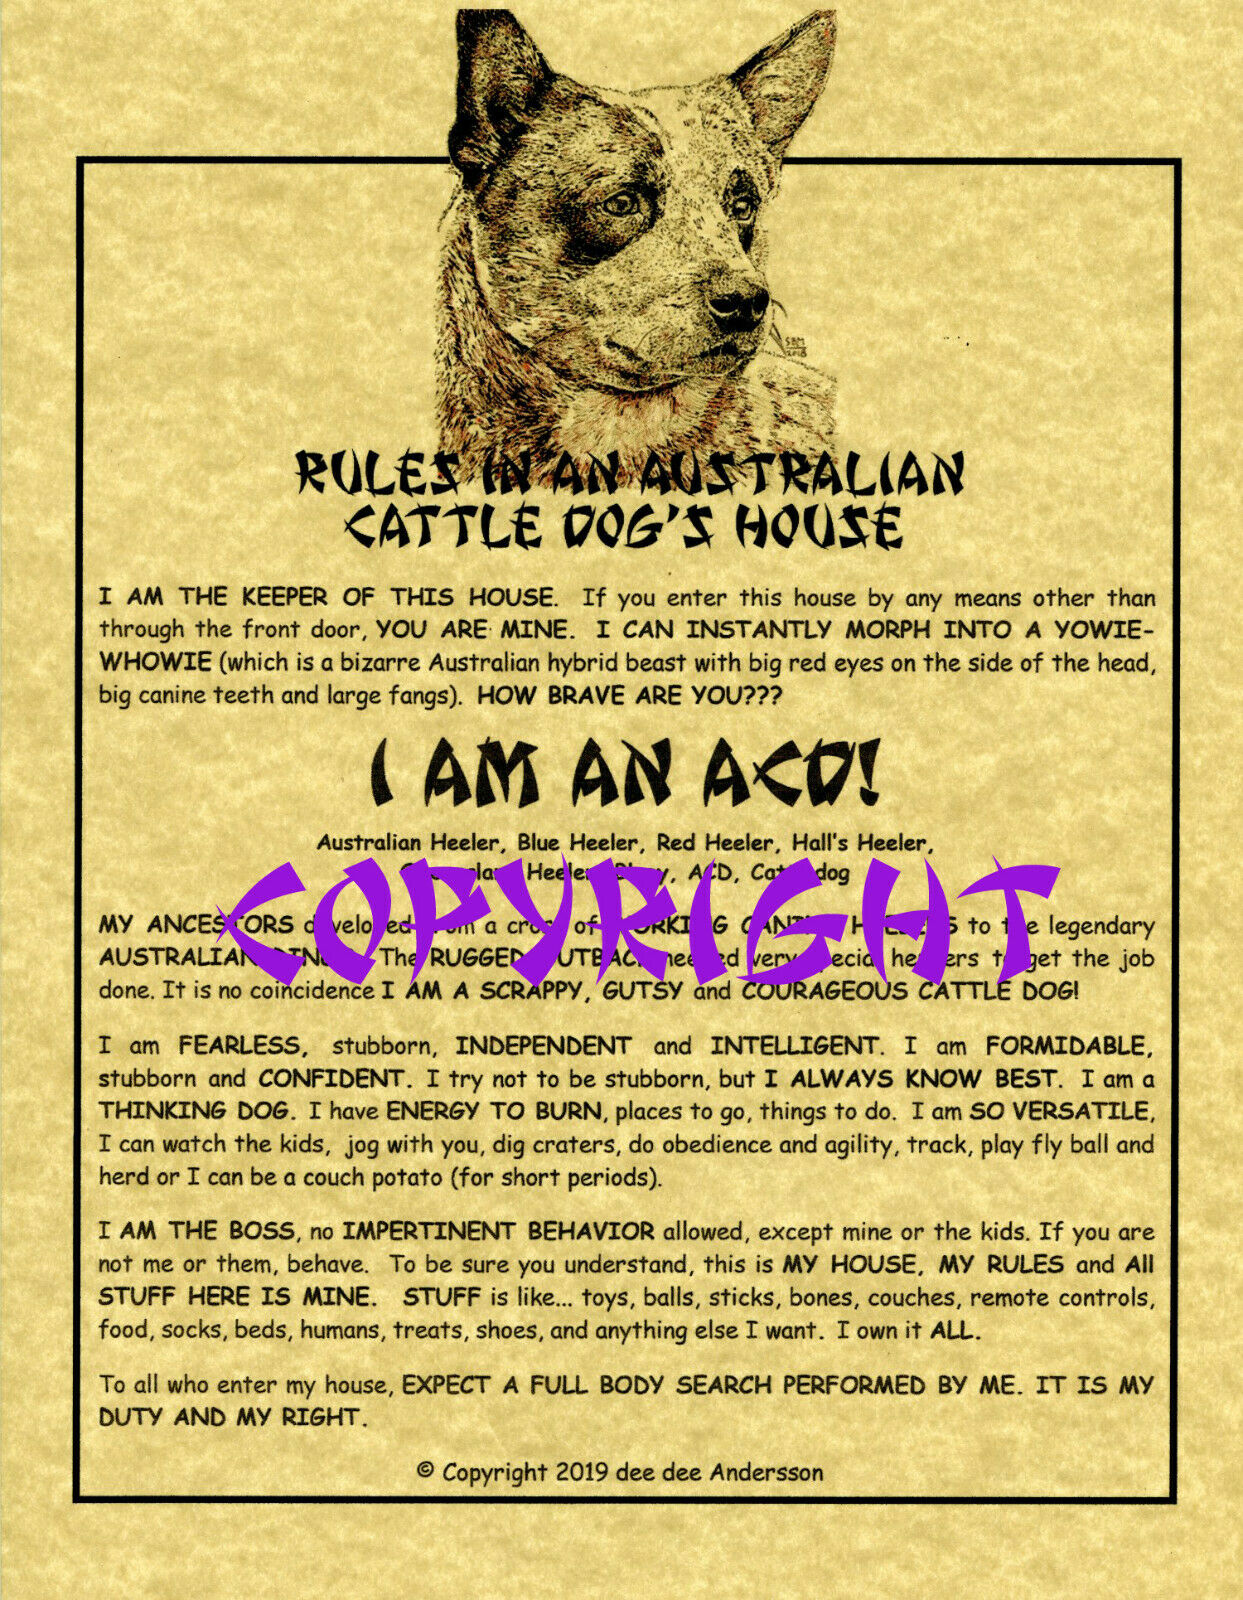 Rules In An Australian Cattle Dog's House